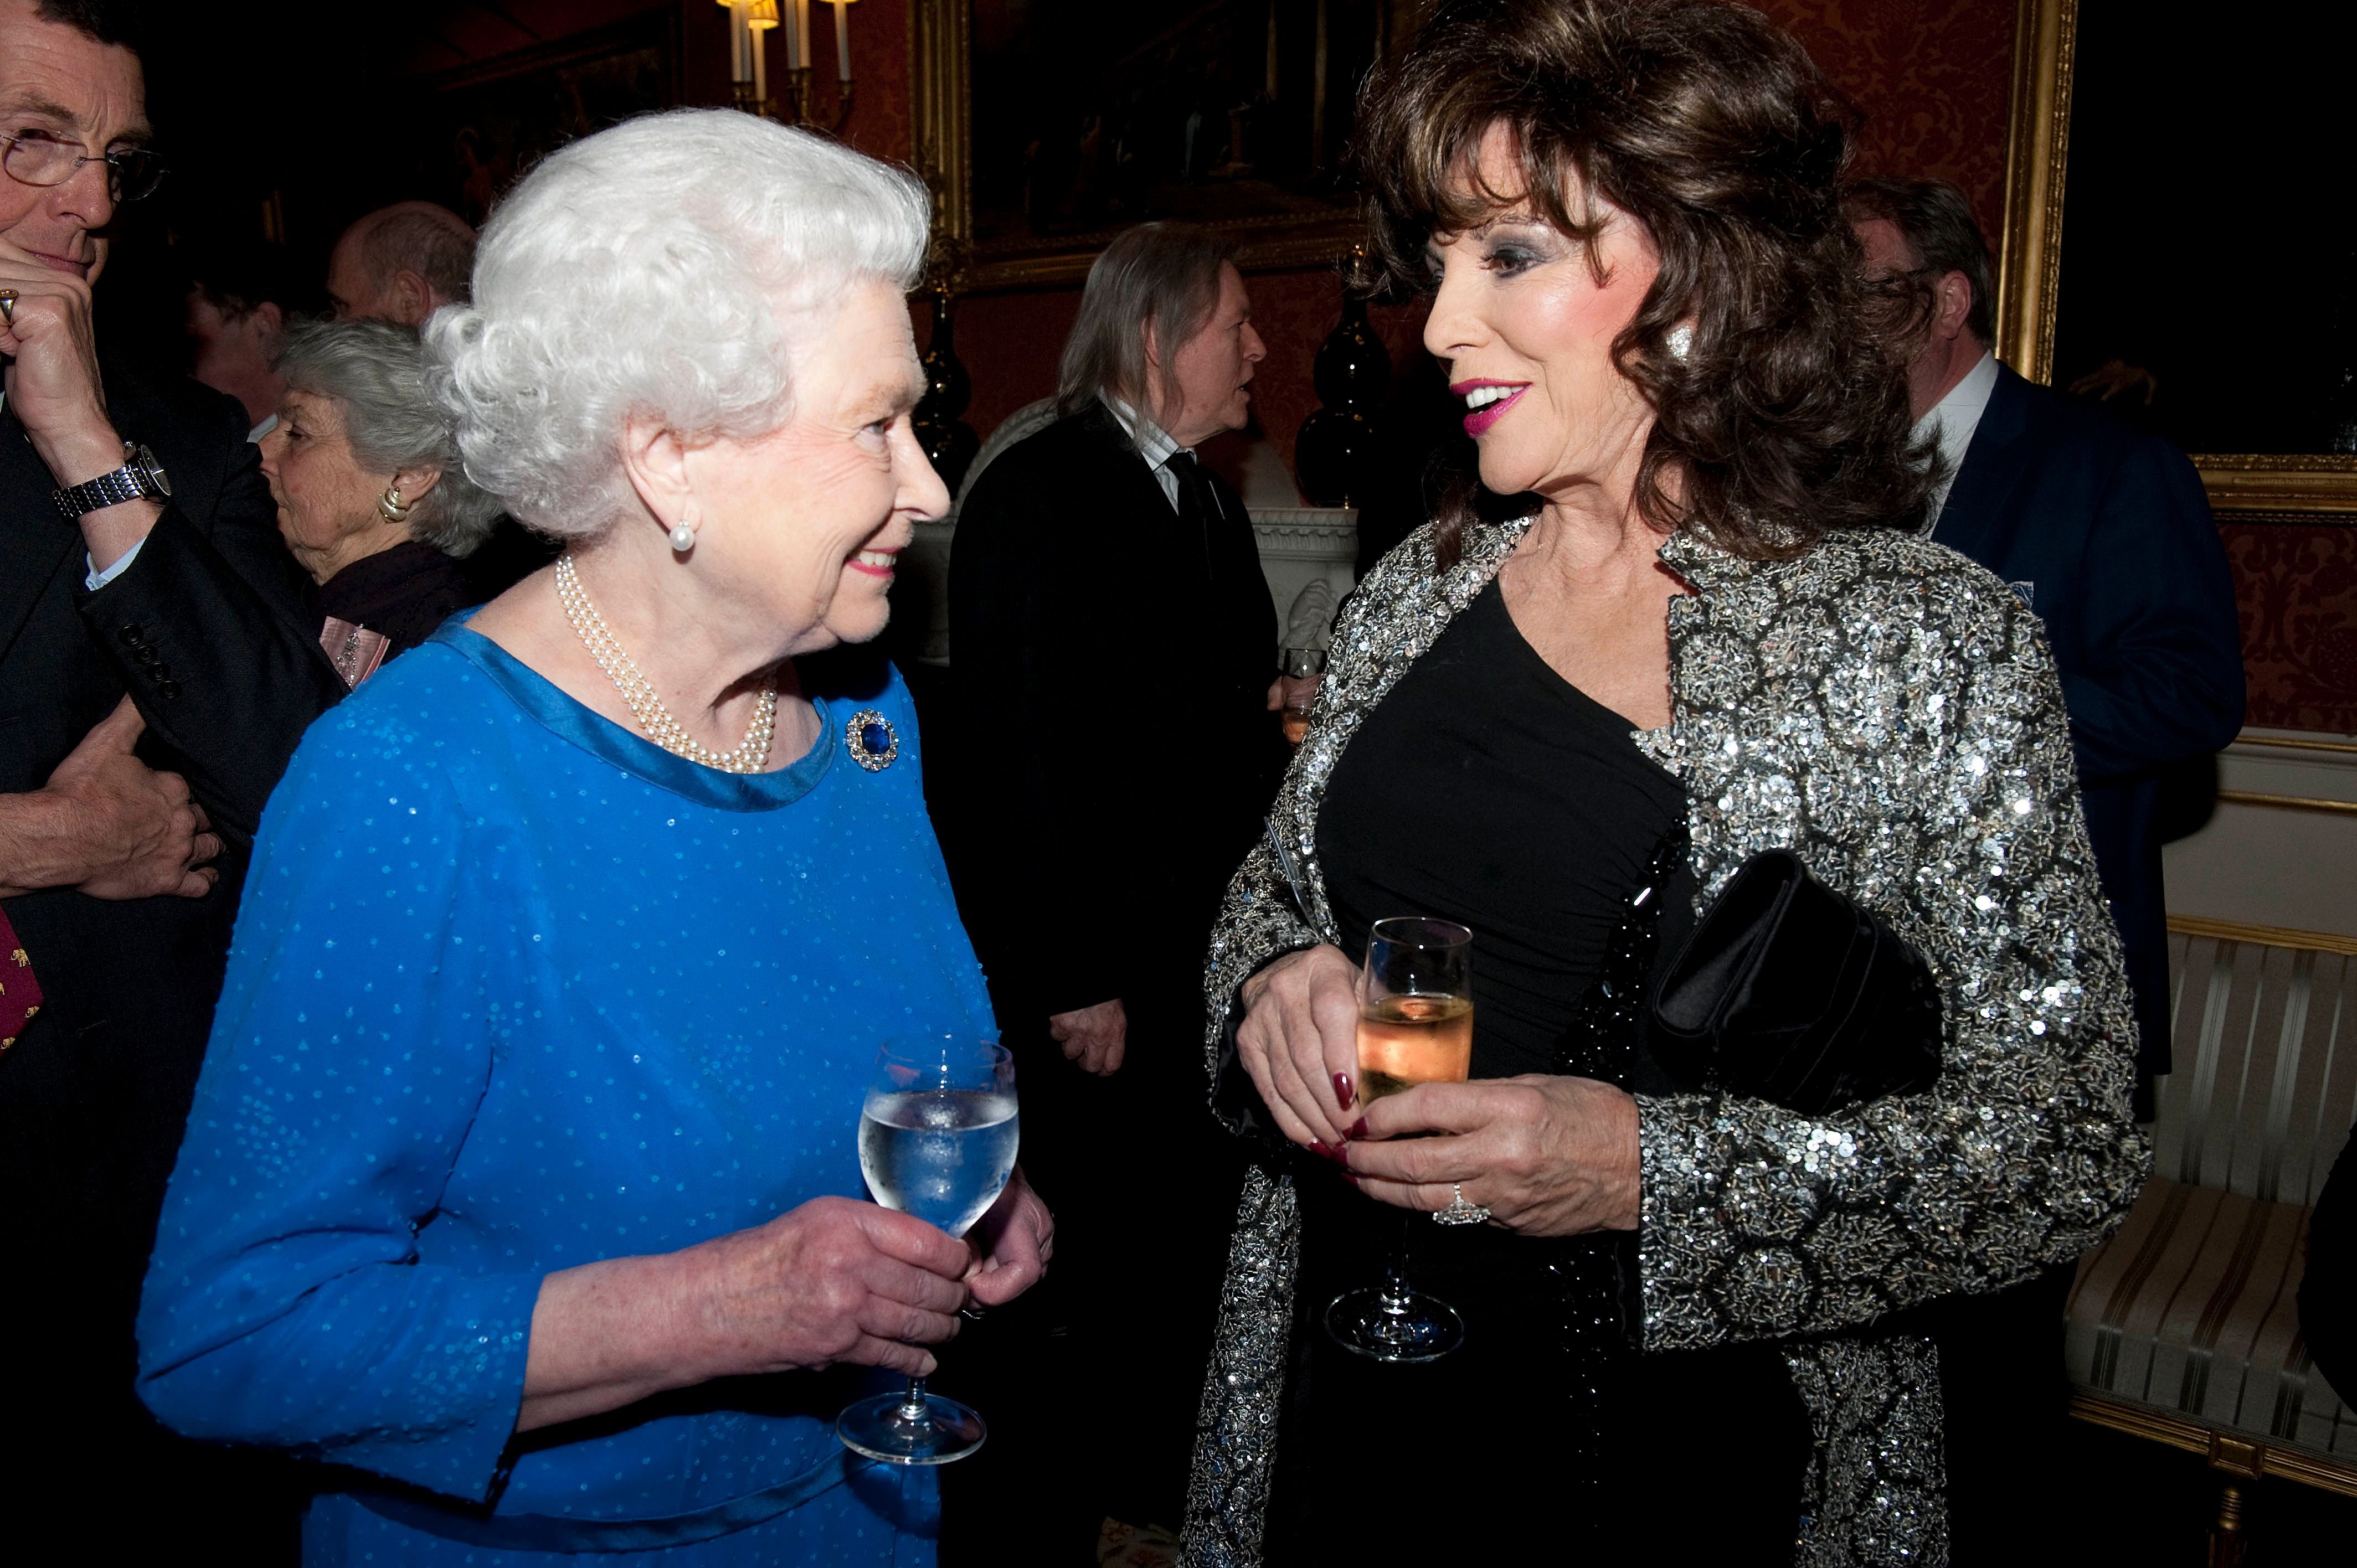 Queen Elizabeth II and Joan Collins at the Dramatic Arts reception at Buckingham Palace on February 17, 2014 | Photo: Getty Images